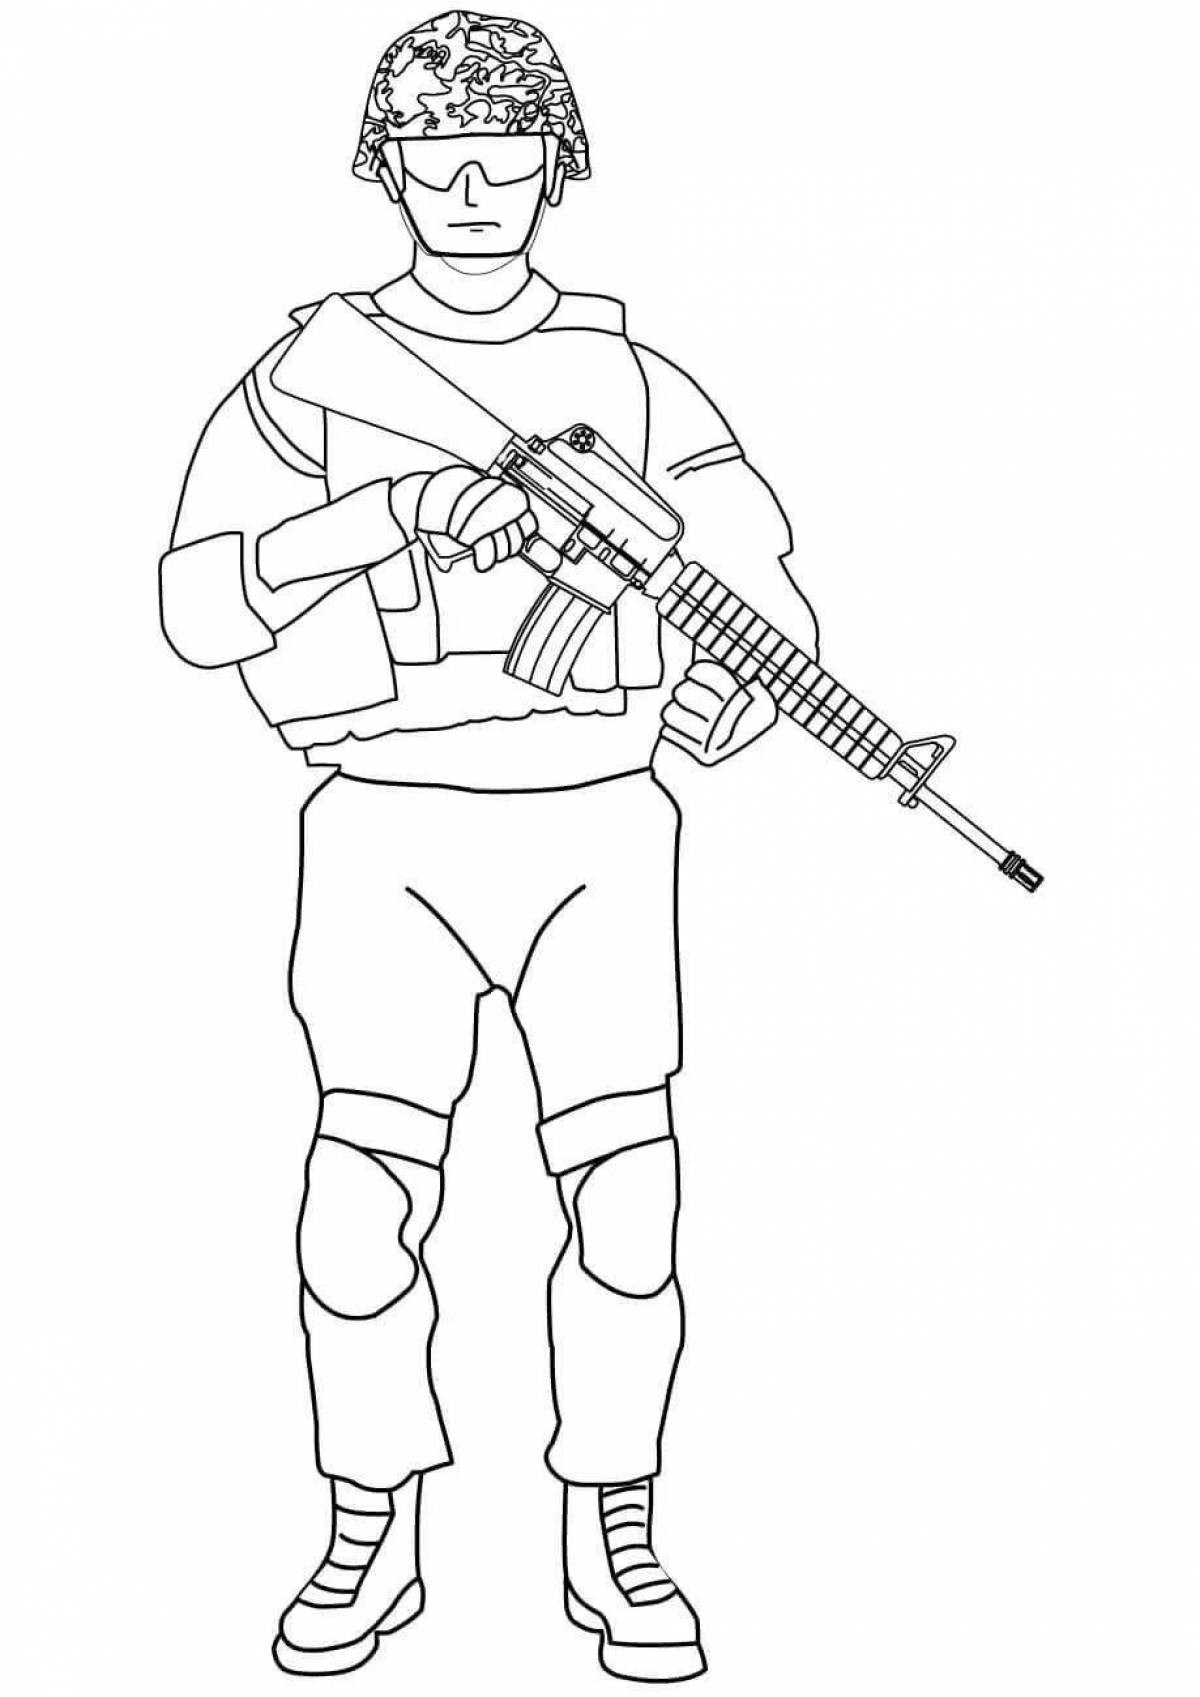 Realistic modern soldier coloring book for kids